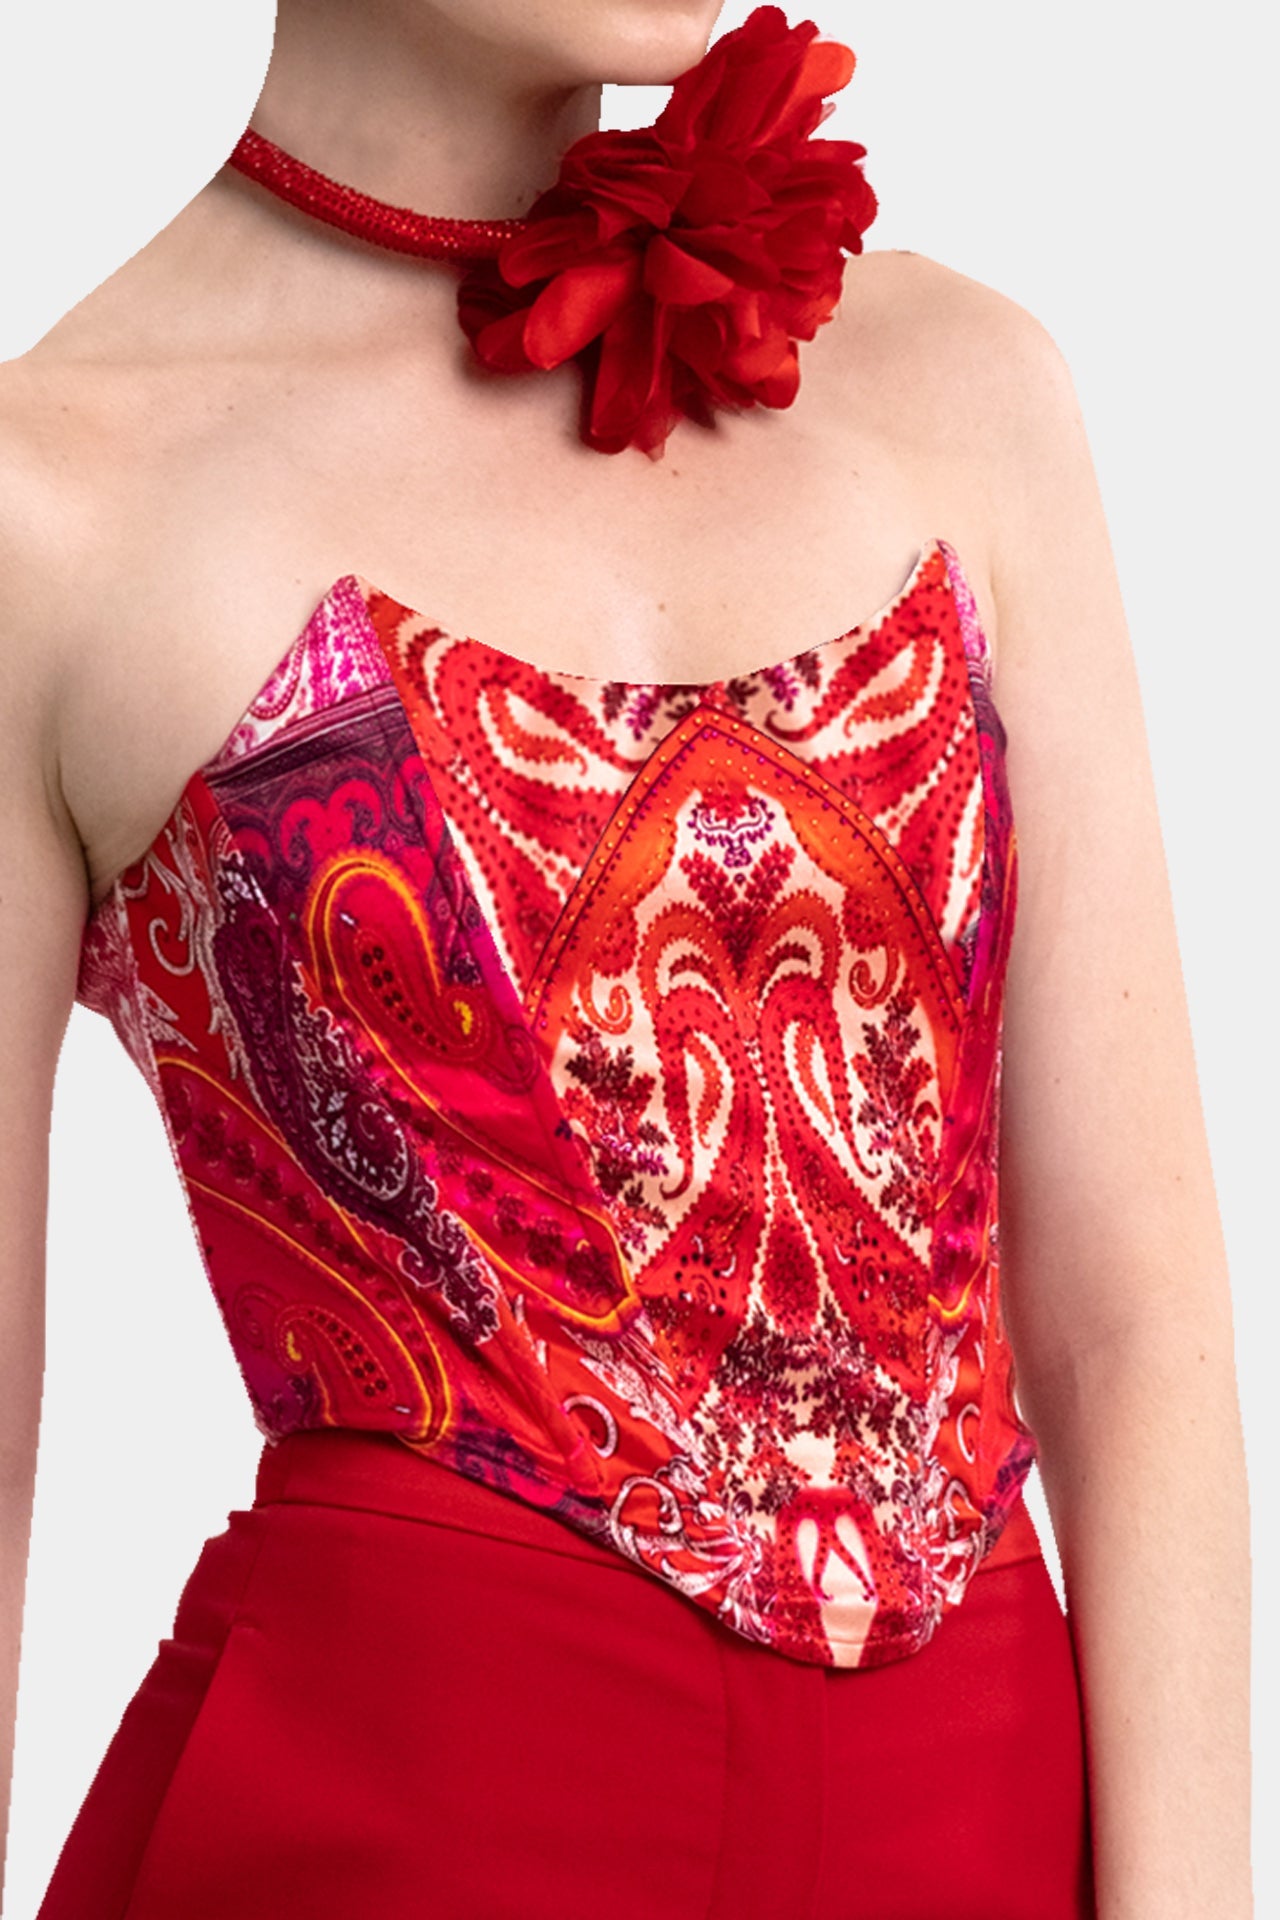 Stretch Jursey Bustier Corset Top in Red